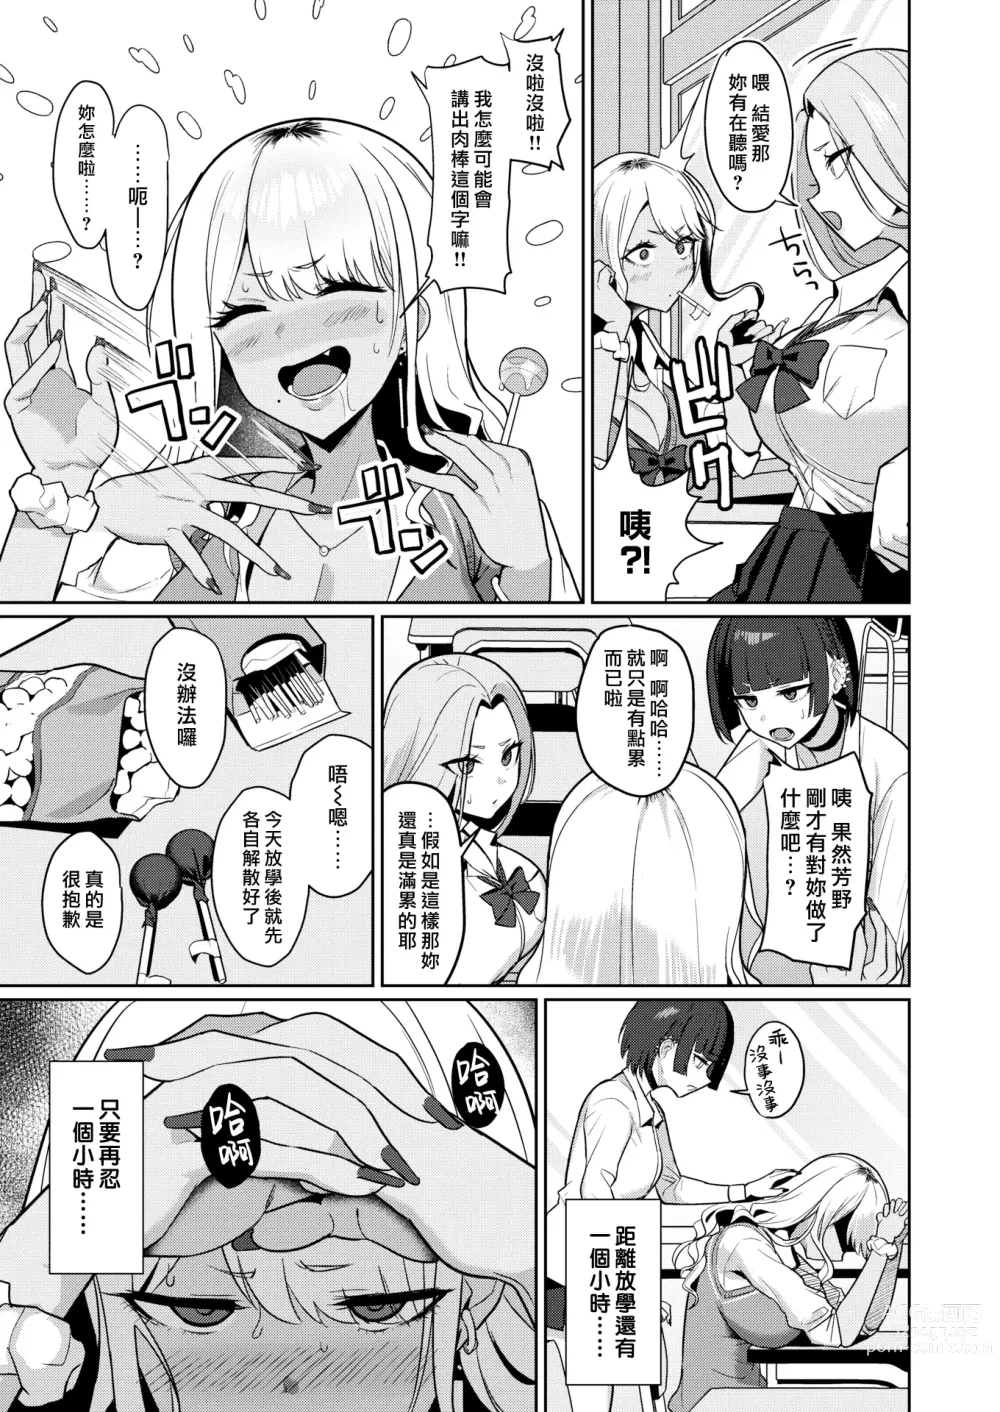 Page 17 of doujinshi センセイなんて大っ嫌い!!